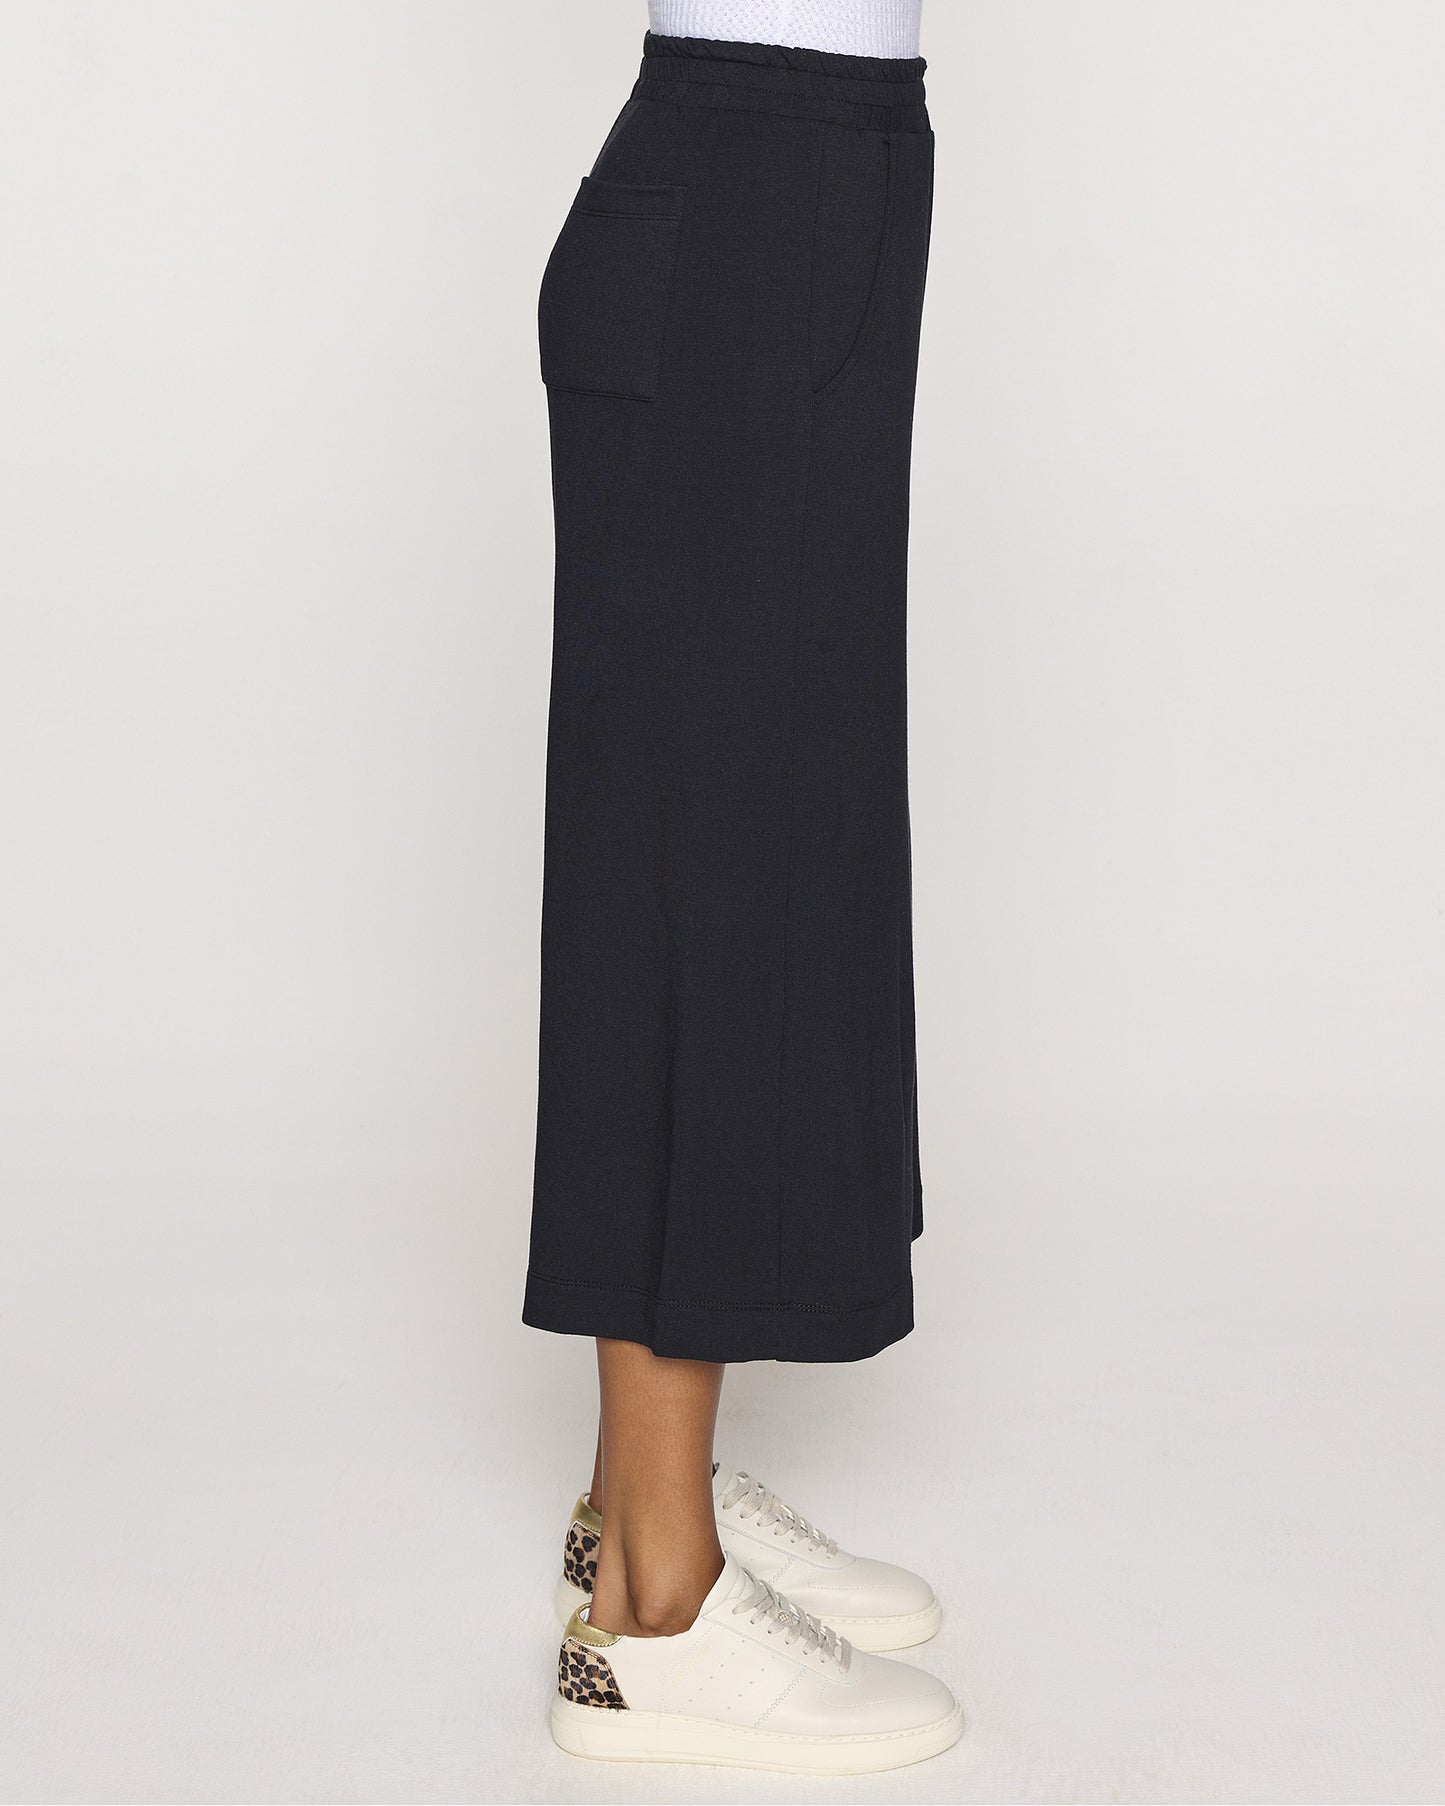 Black | The Culottes Side